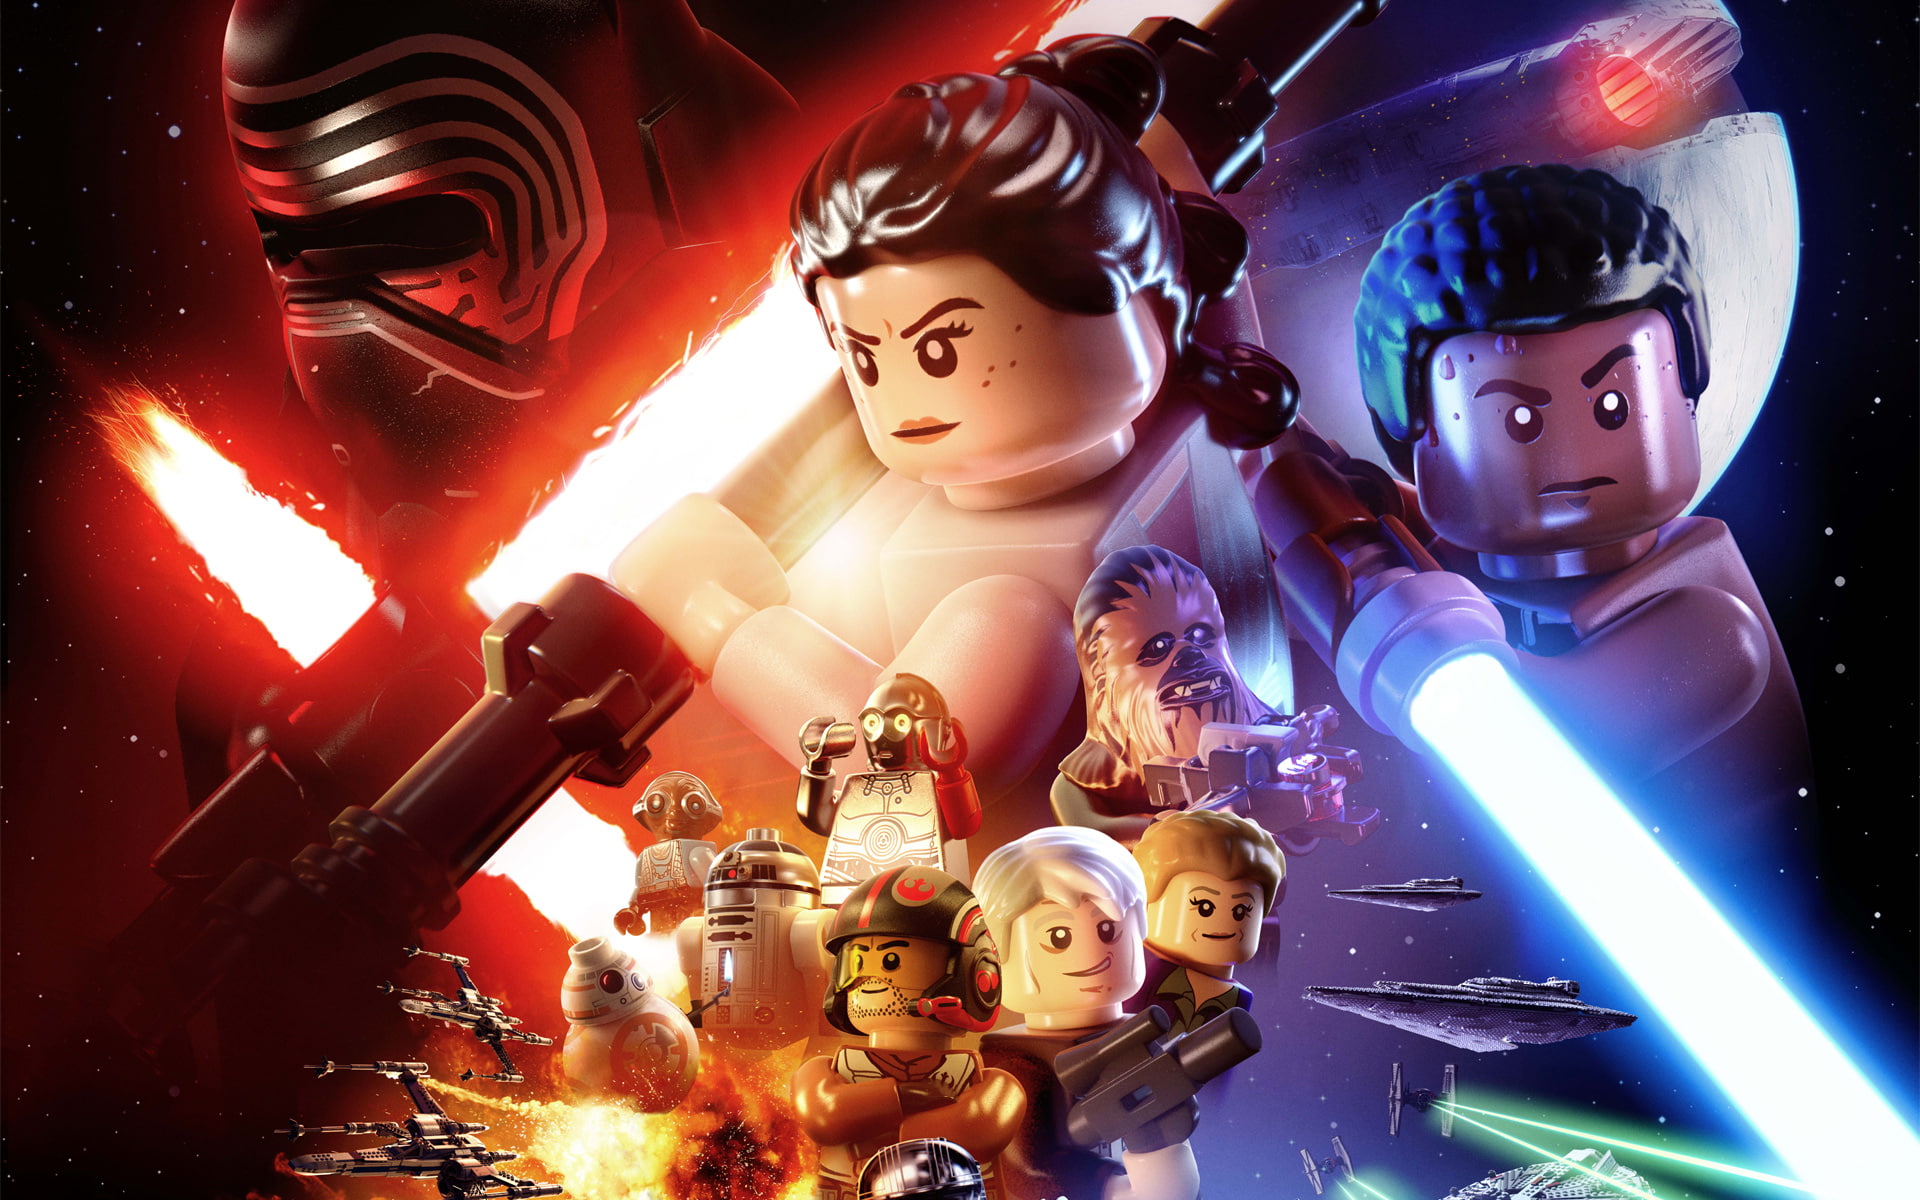 lego, ego star wars the force awakens, games, pc games, ps games